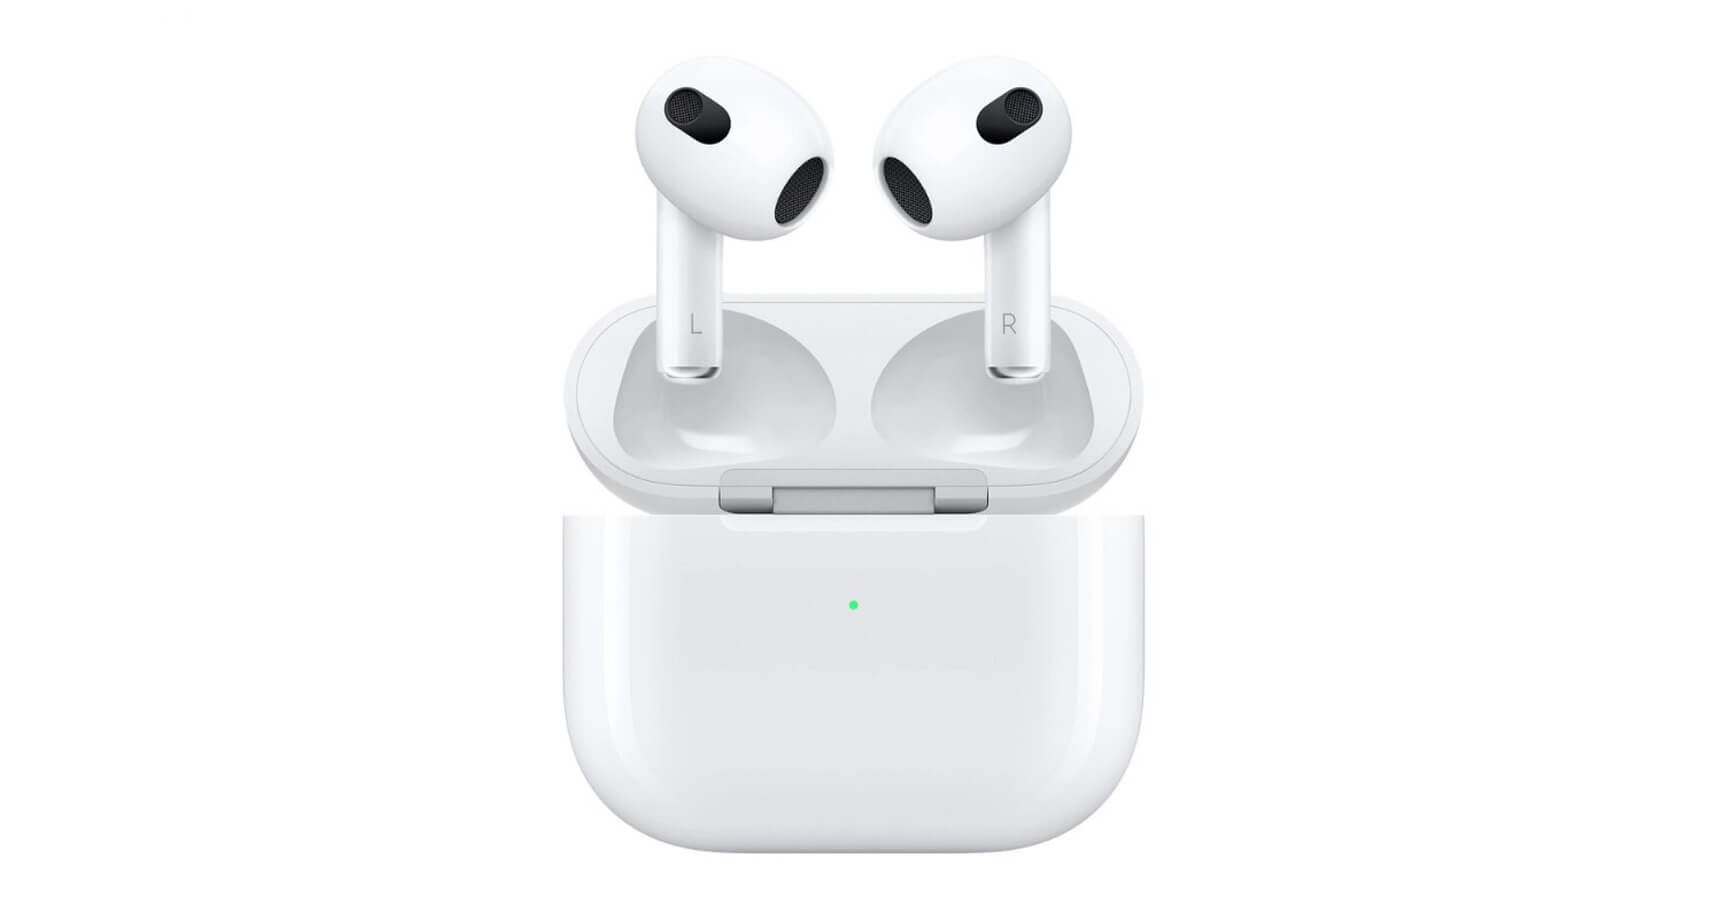 Apple Airpods (3rd Generation) Price Drop